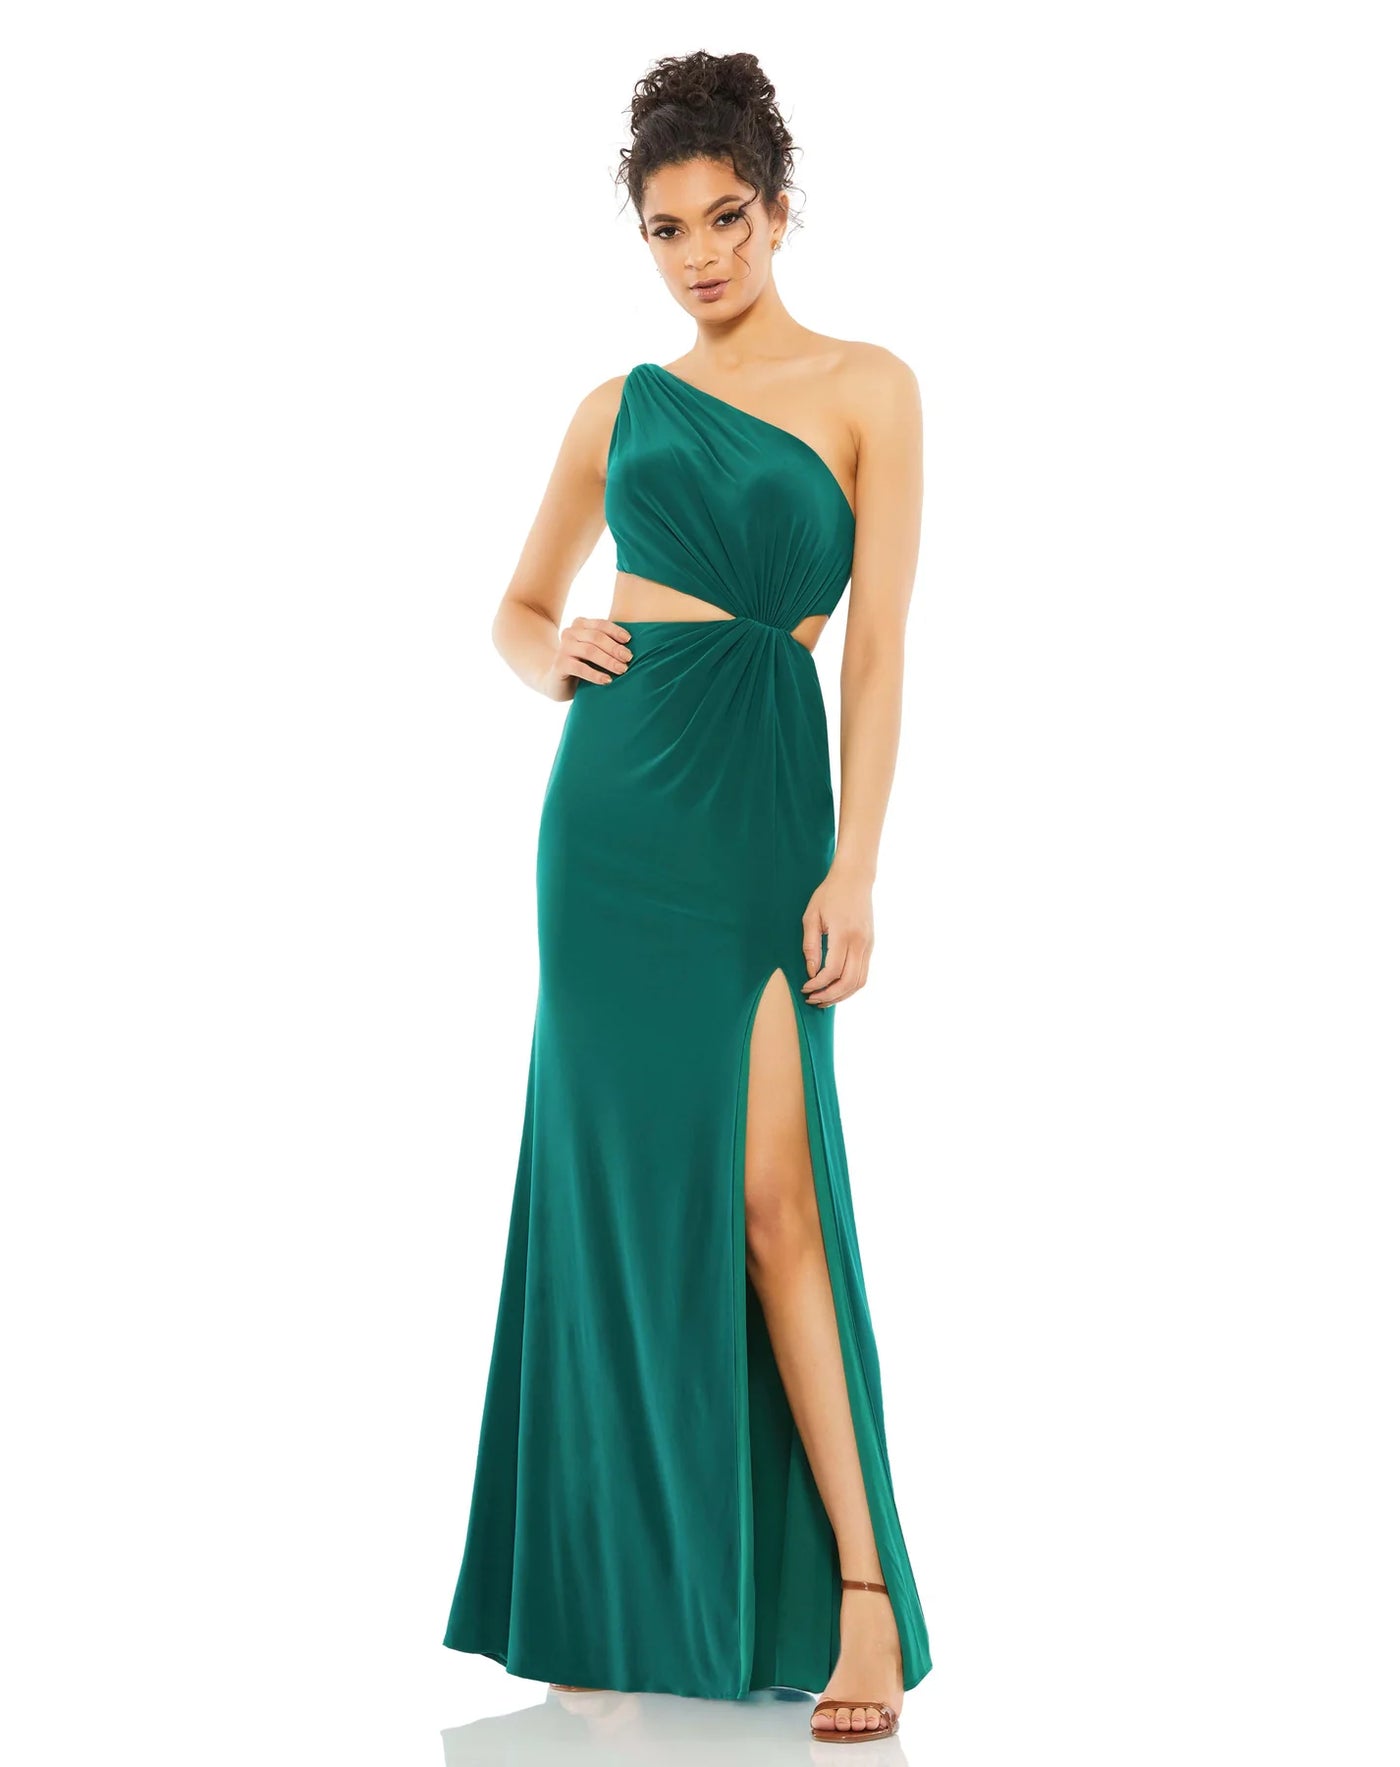 Mac Duggal 70244 One Shoulder Ruched Cut Out Jersey Gown B Chic Fashions Long Dress Evening Gowns